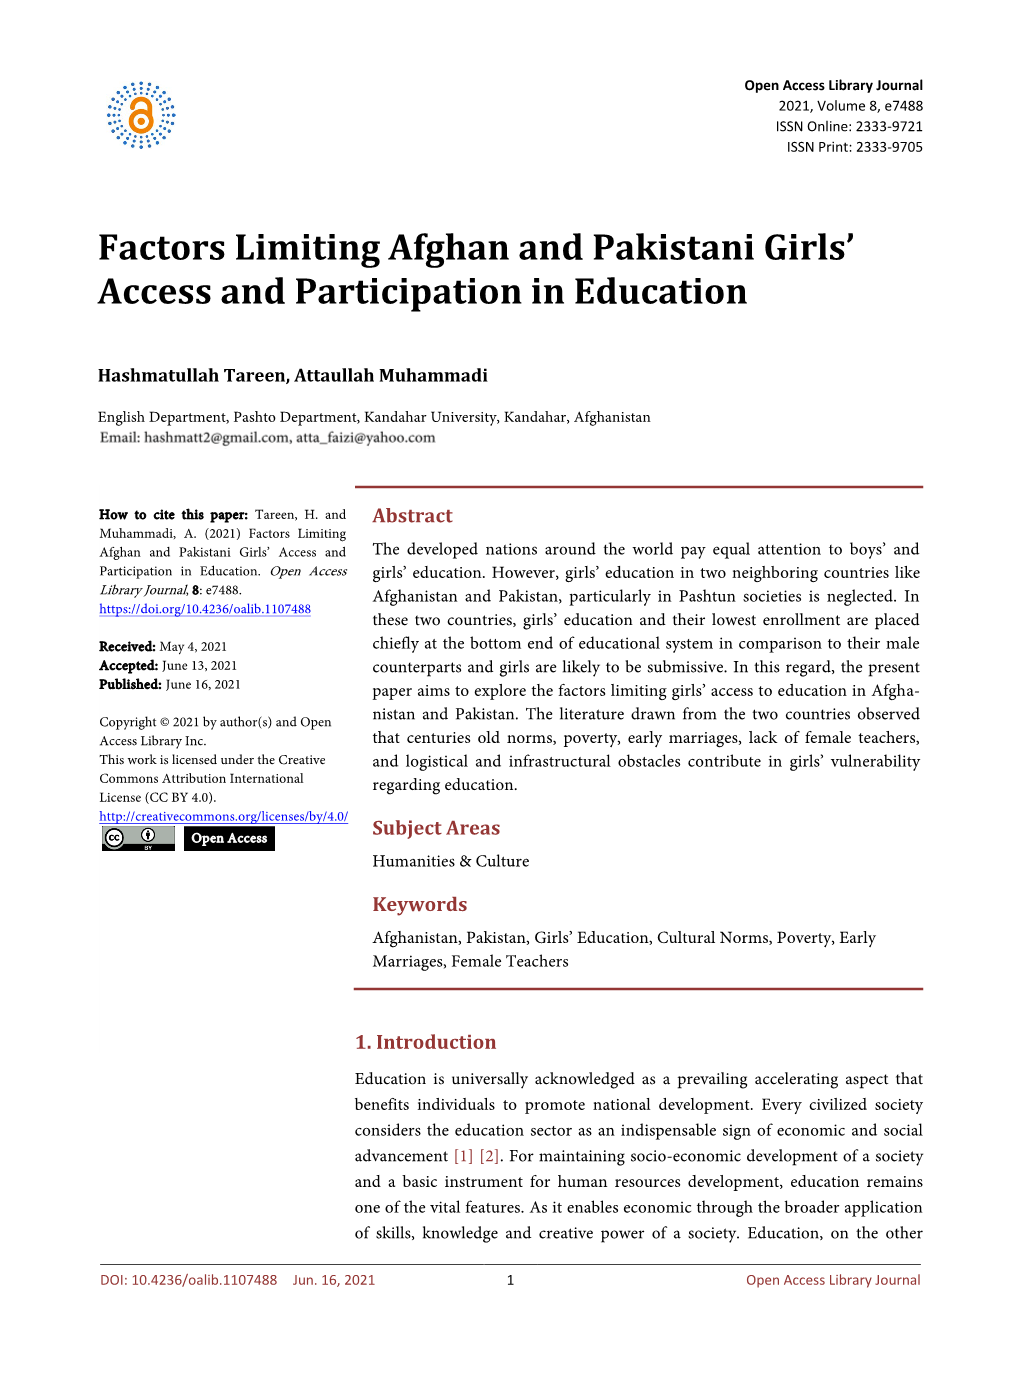 Factors Limiting Afghan and Pakistani Girls' Access and Participation in Education